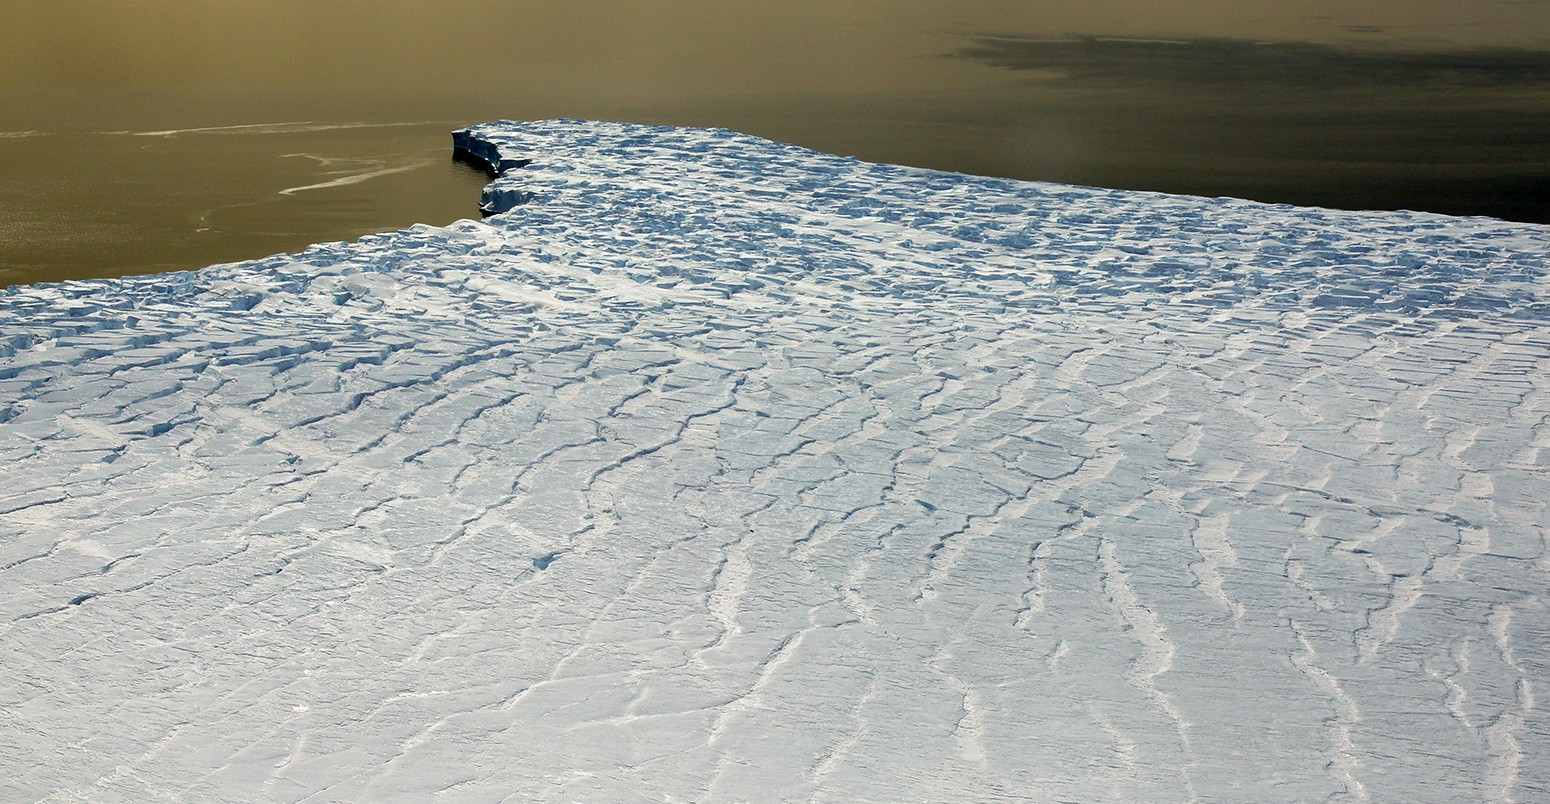 Highly crevassed ice front of Ferrigno Ice Stream in the Bellingshausen Sea. Picture taken during the airborne NASA IceBridge campaign on November 16, 2011. Picture: Matthias Braun, University of Erlangen-Nuremberg, Germany.